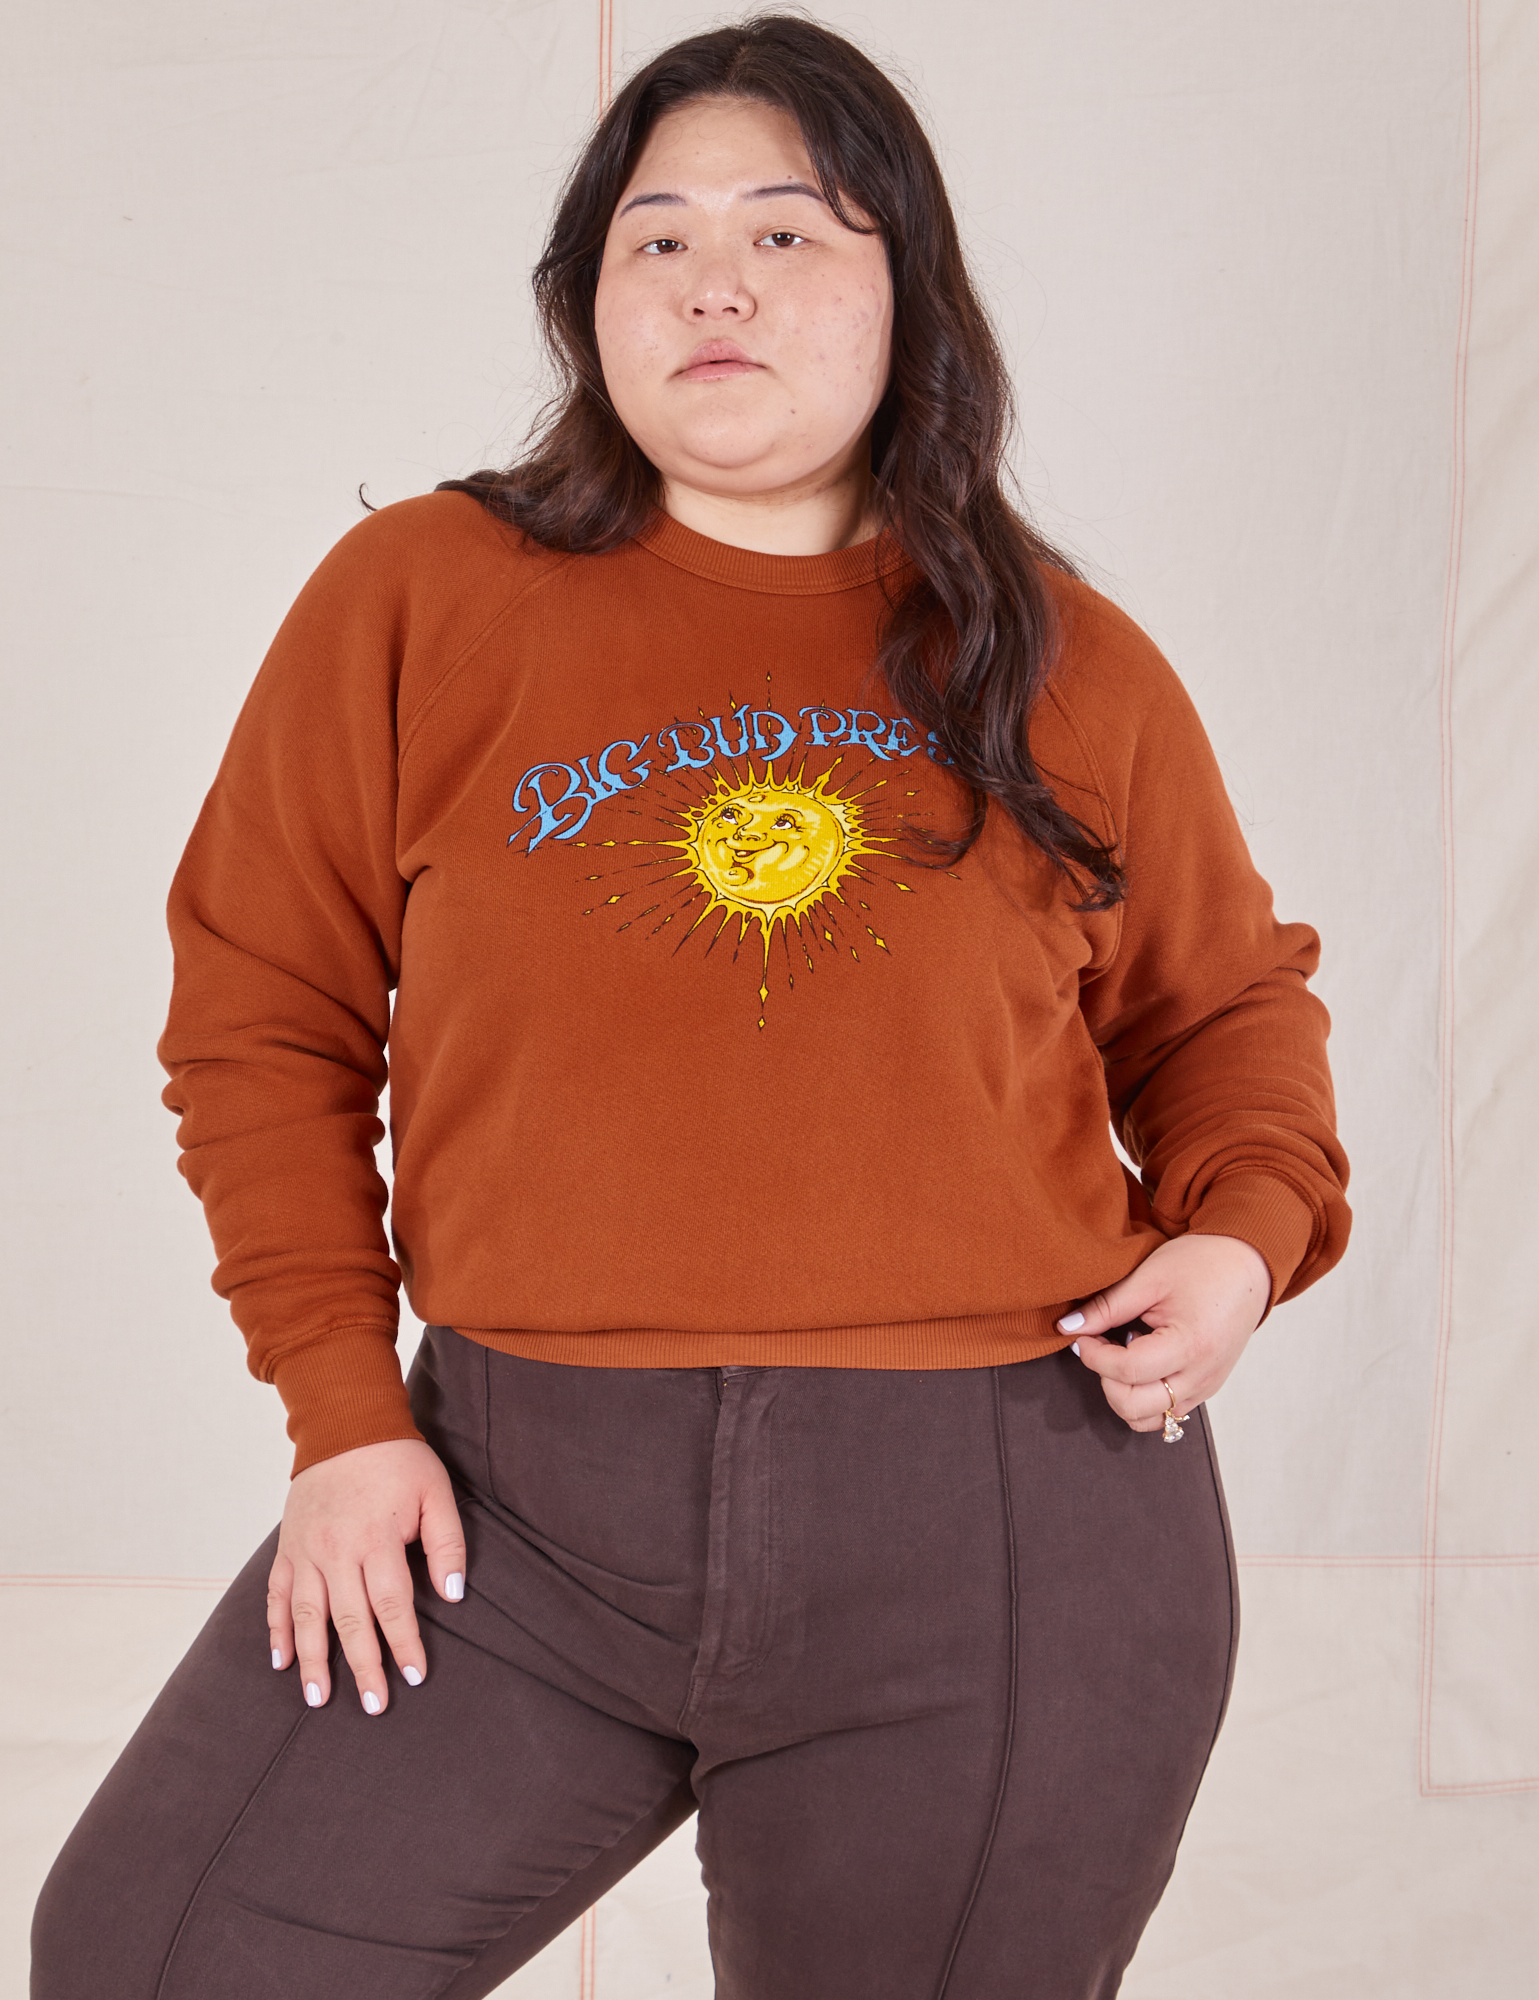 Ashley is 5&#39;7&quot; and wearing L Bill Ogden&#39;s Sun Baby Crew paired with espresso brown Western Pants